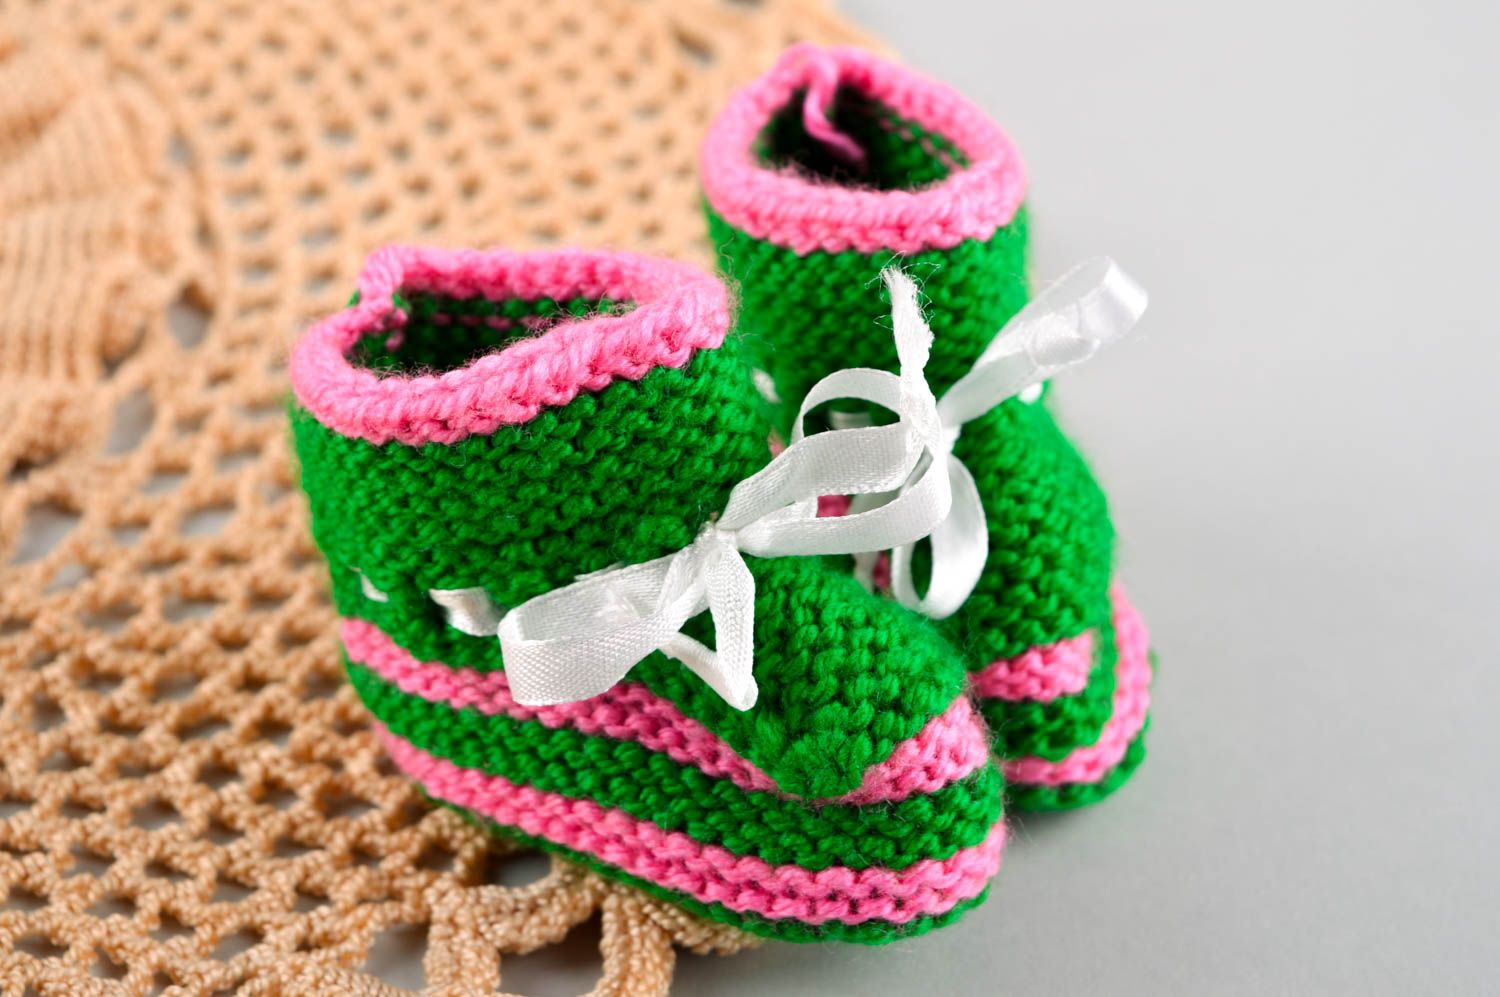 Handmade baby shoes crochet baby shoes baby socks goods for children kids gifts photo 1